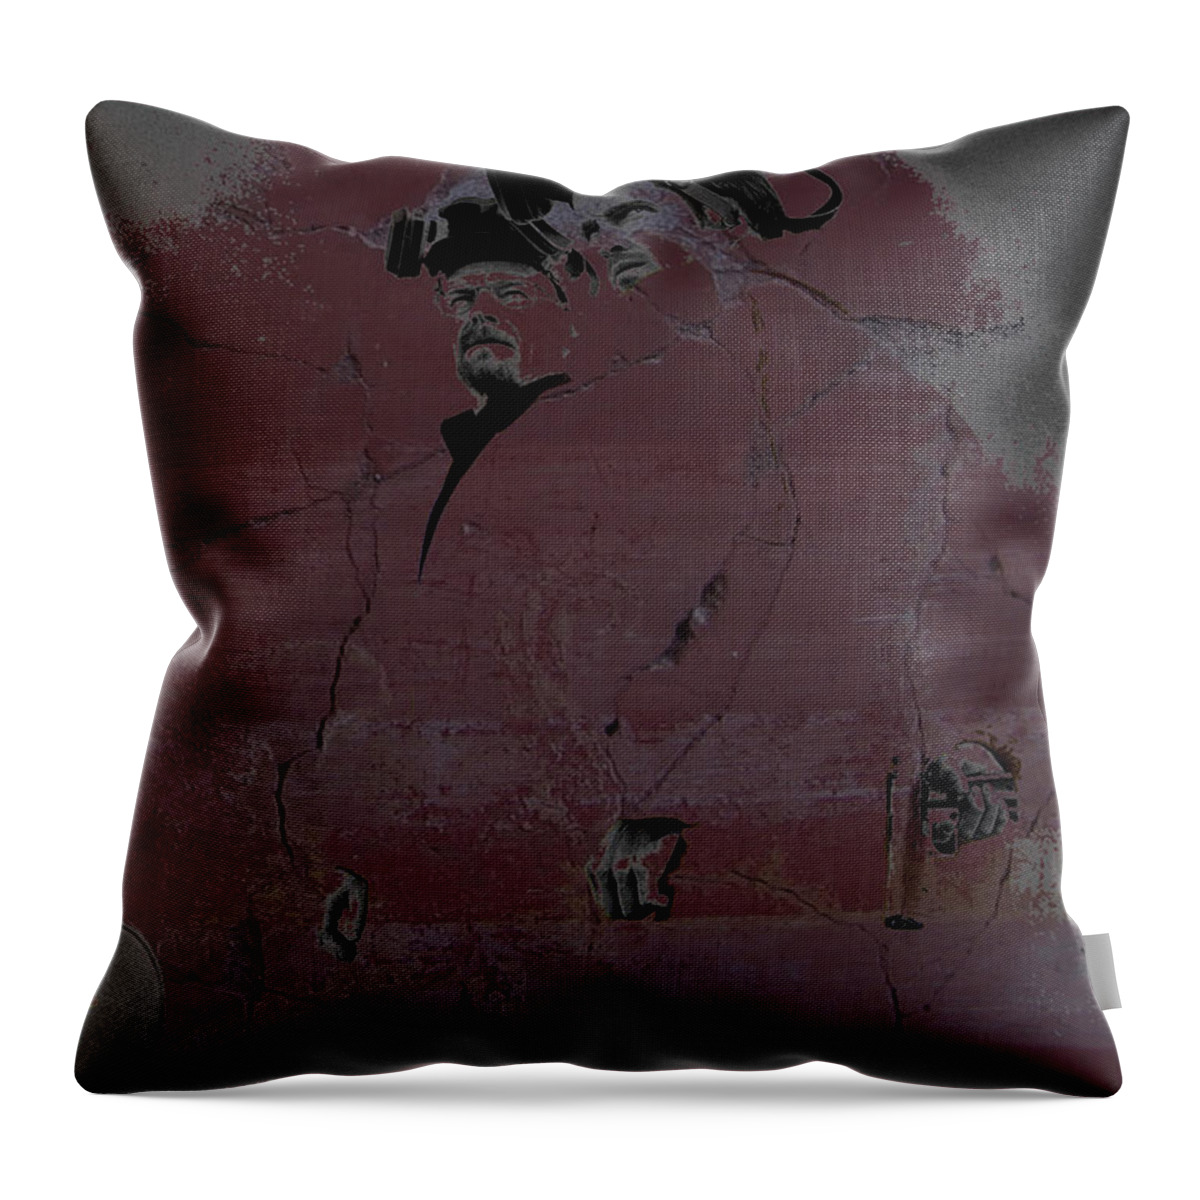 Breaking Bad Throw Pillow featuring the digital art Breaking Bad Concrete Wall by Brian Reaves